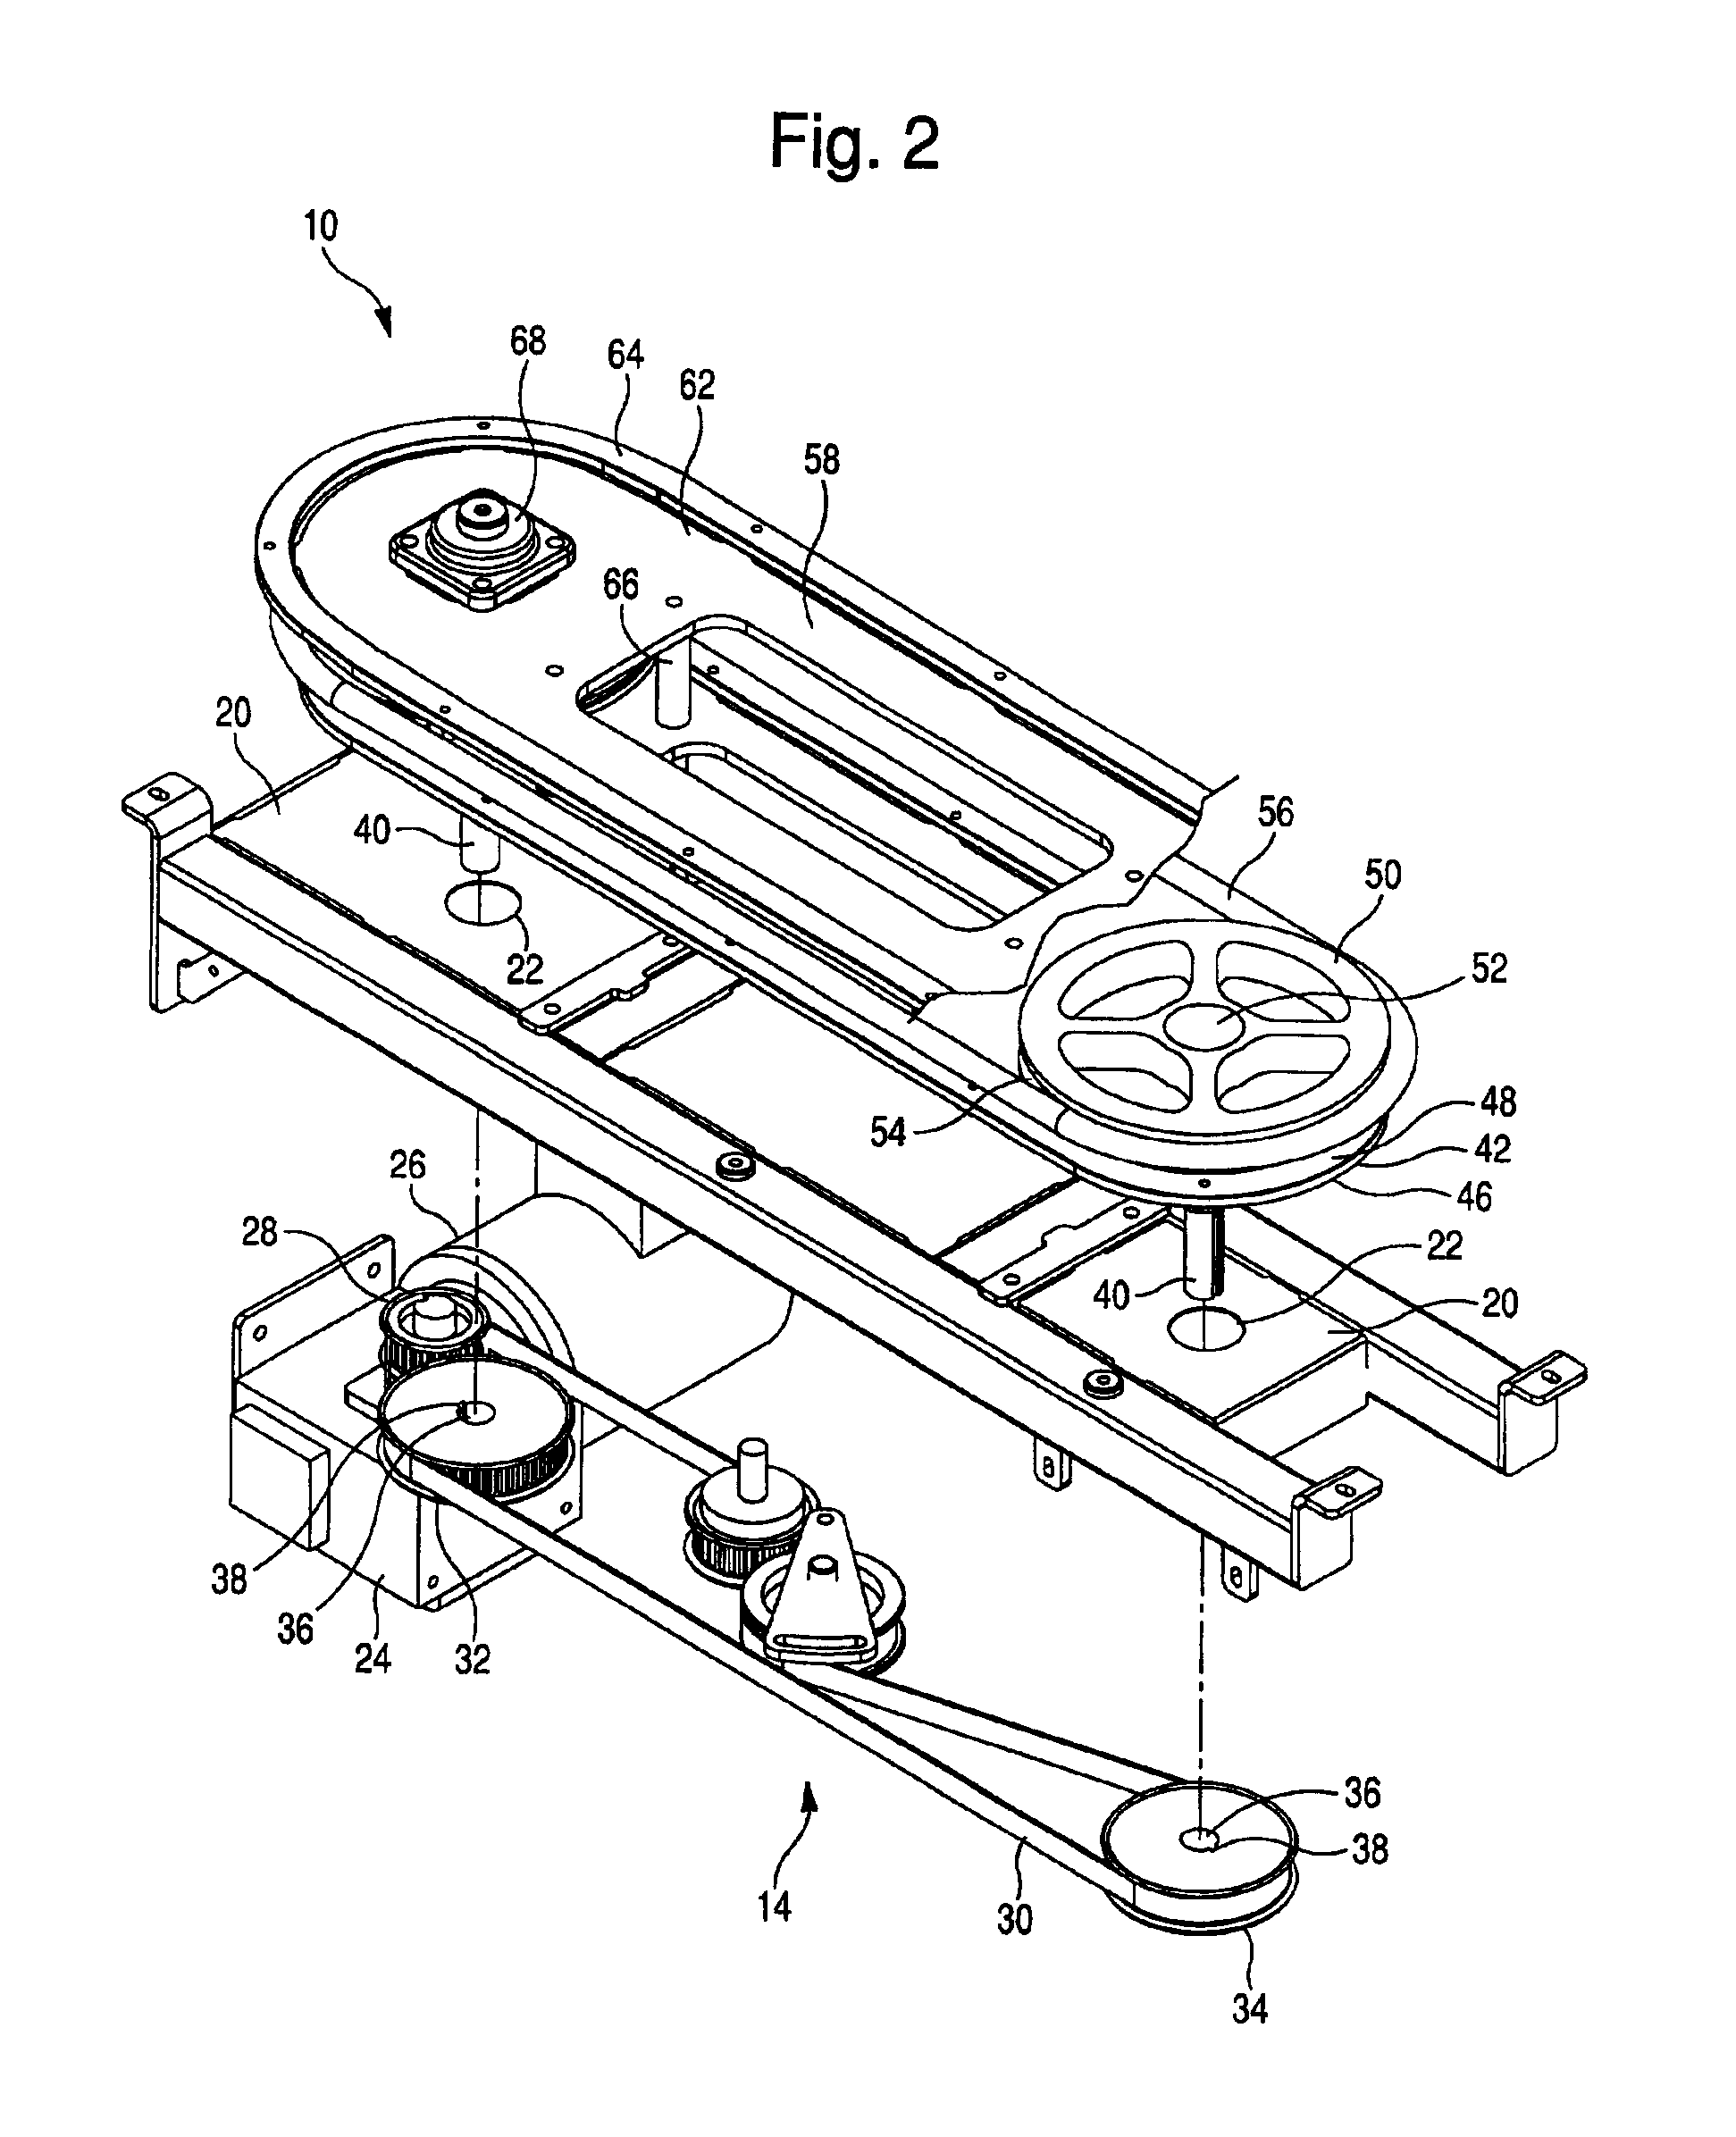 Method and apparatus for buffering a flow of objects